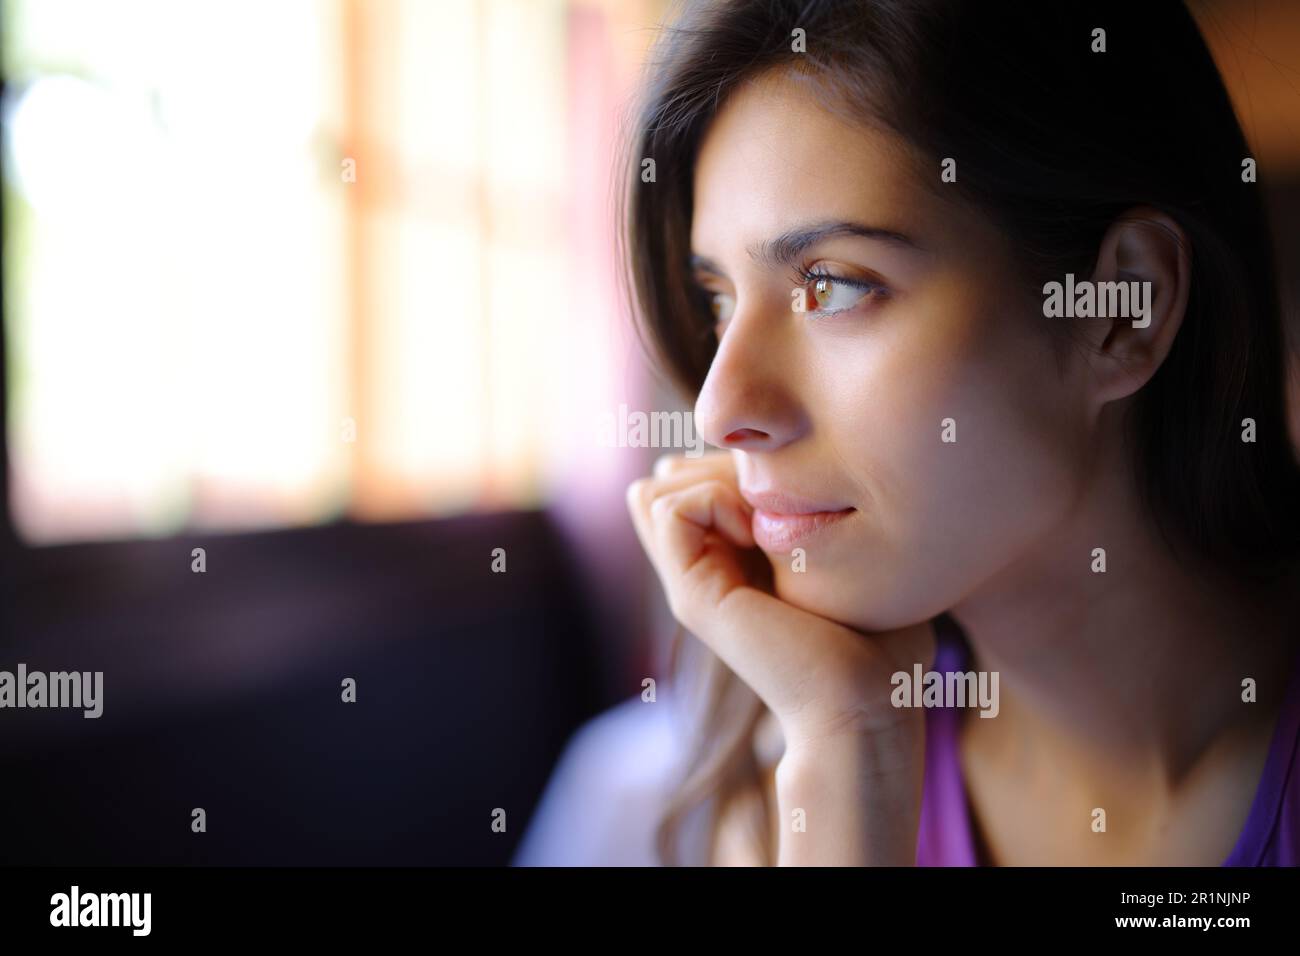 Beautiful woman relaxing looking through a window in a house interior Stock Photo